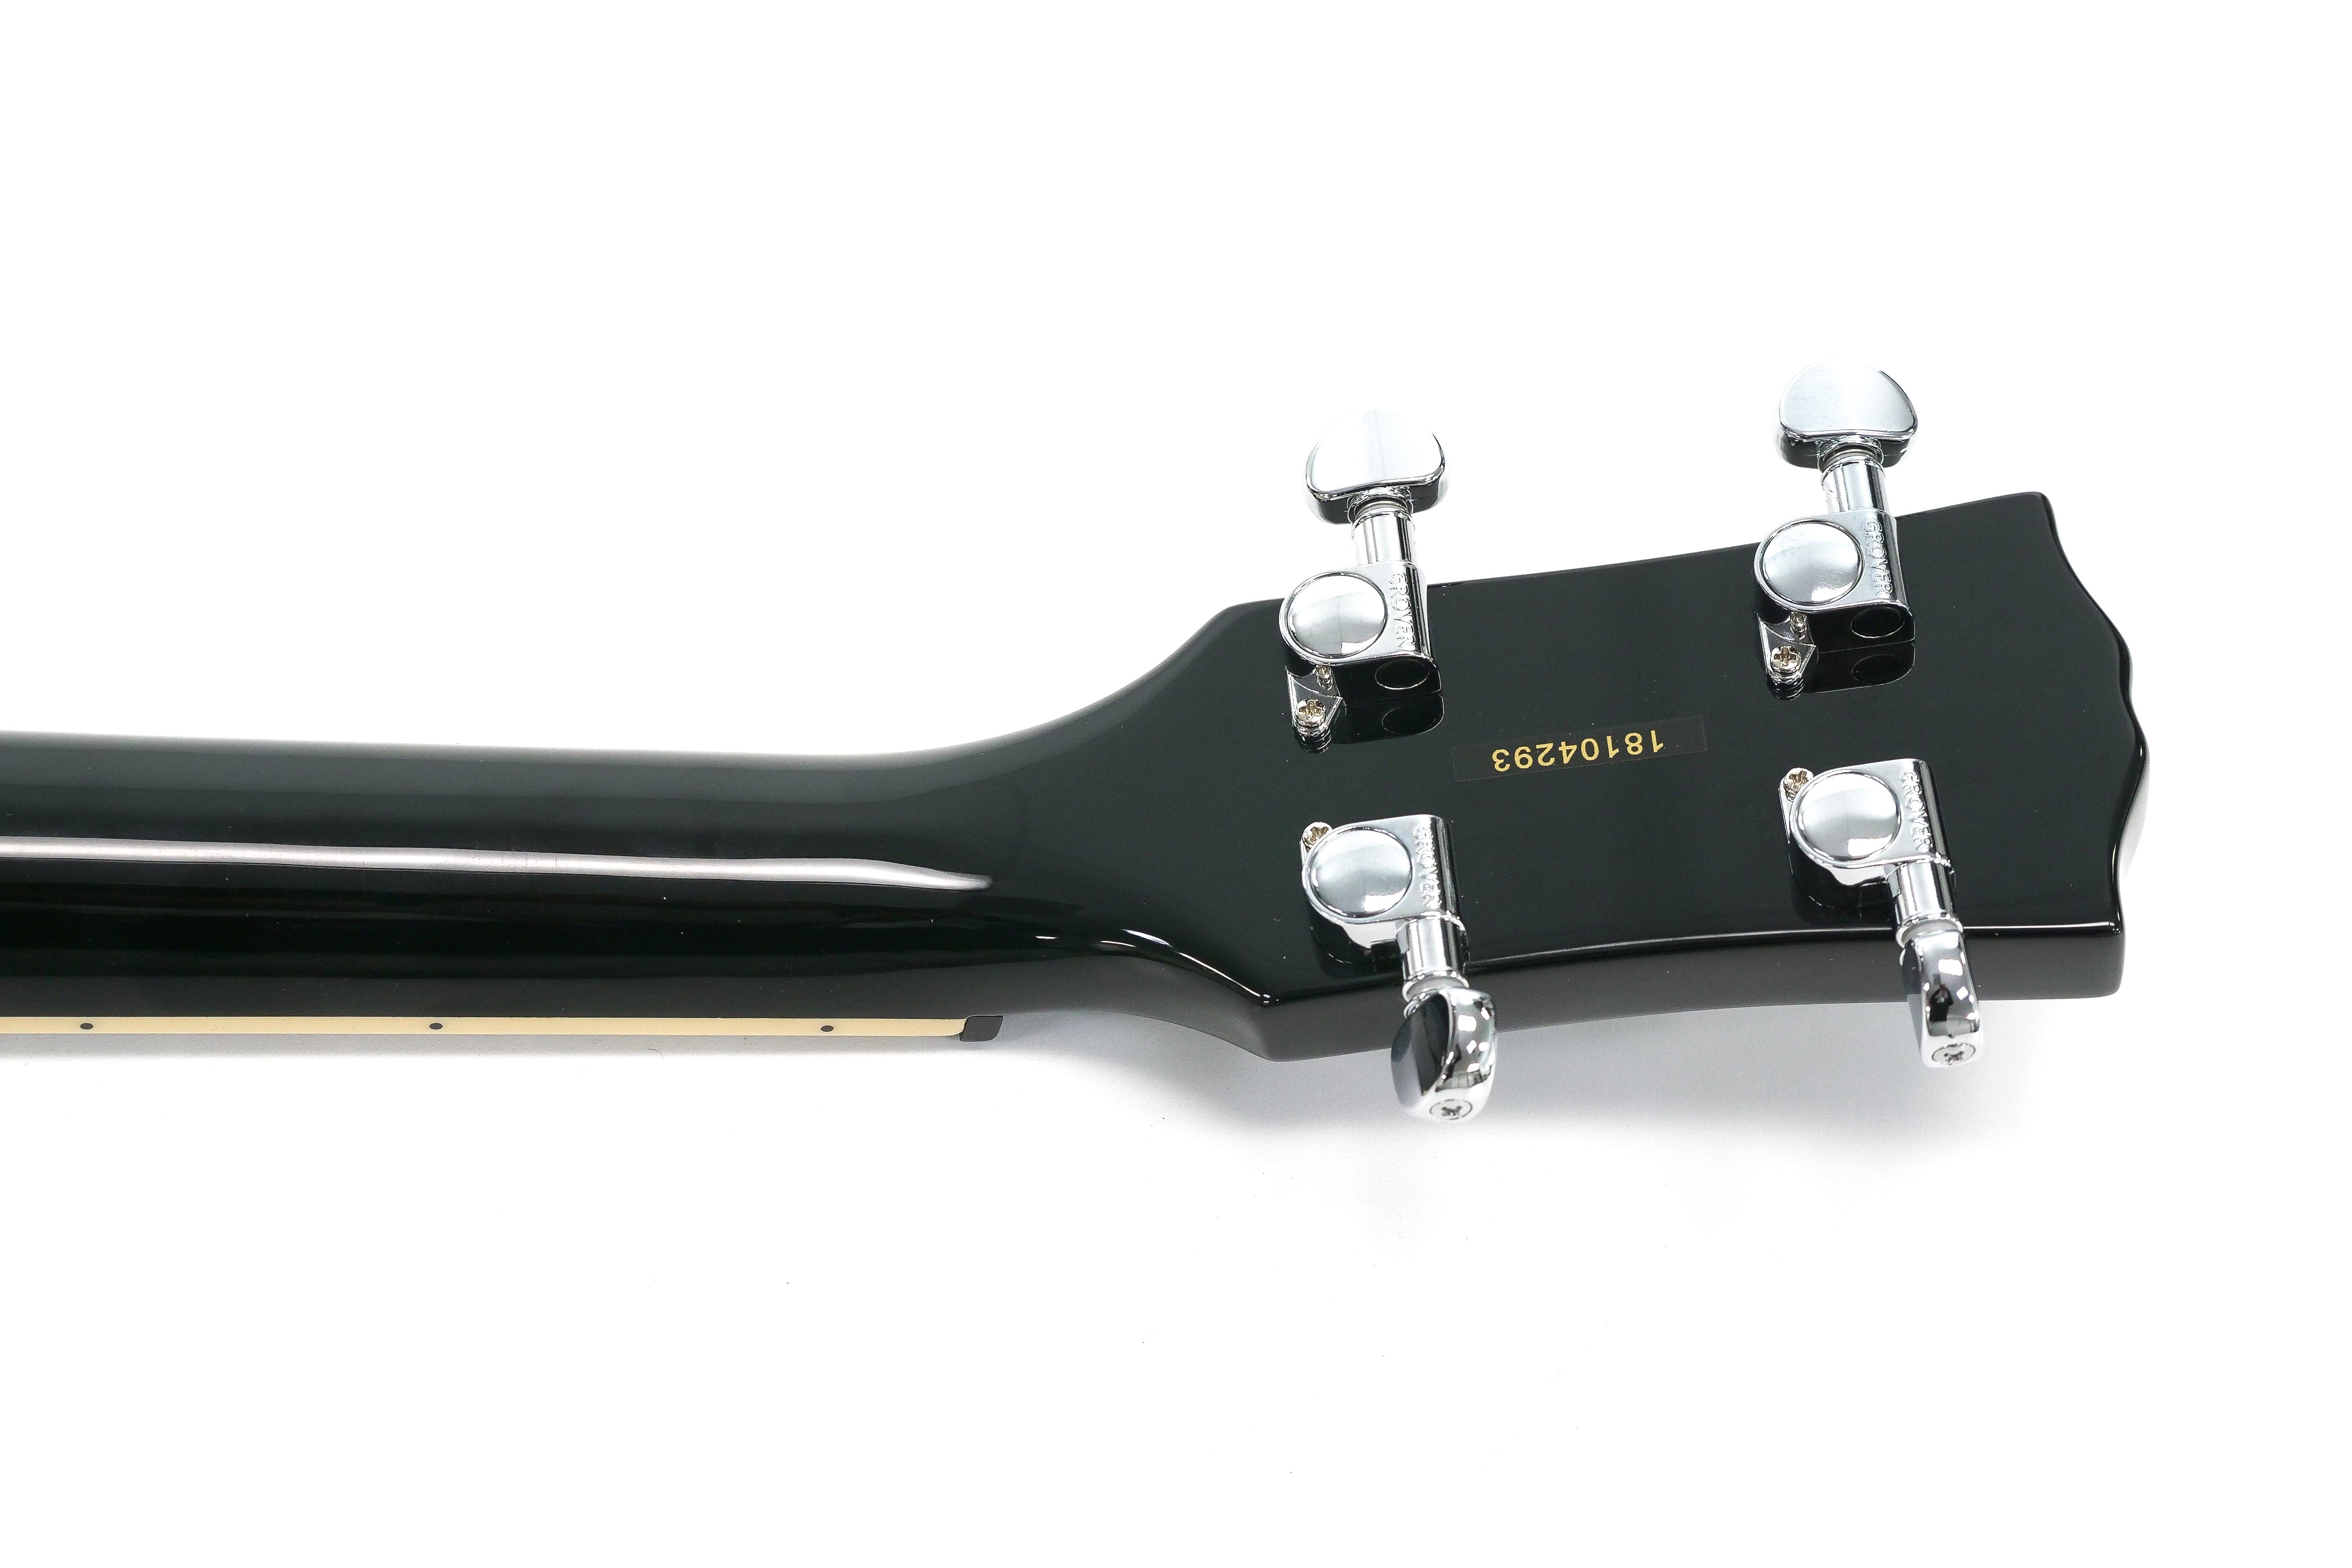 tuners and serial number on back of headstock